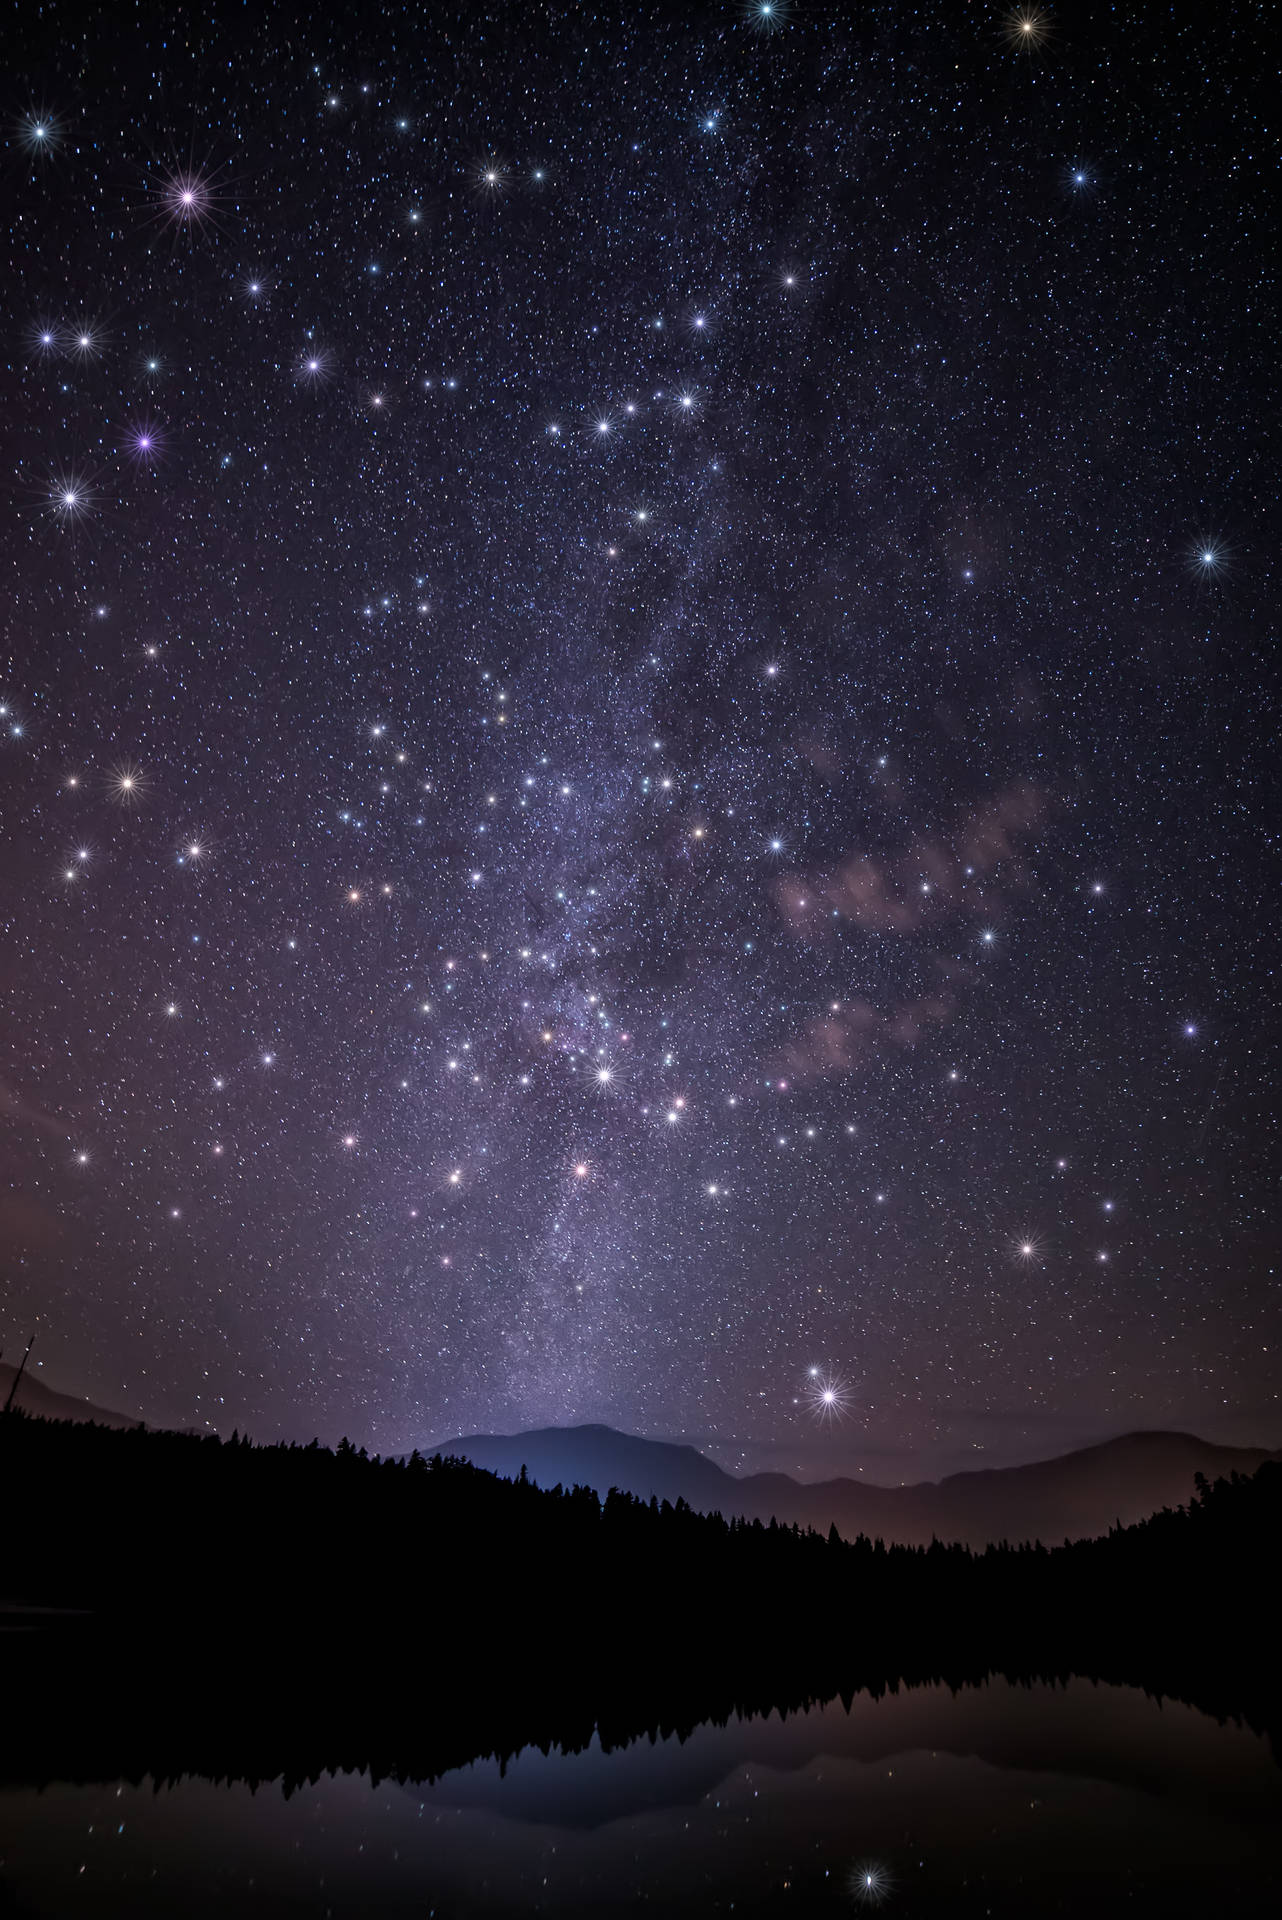 An Epic Night-time View Of A Mountain Landscape Surrounded By A Galaxy Of Stars. Background